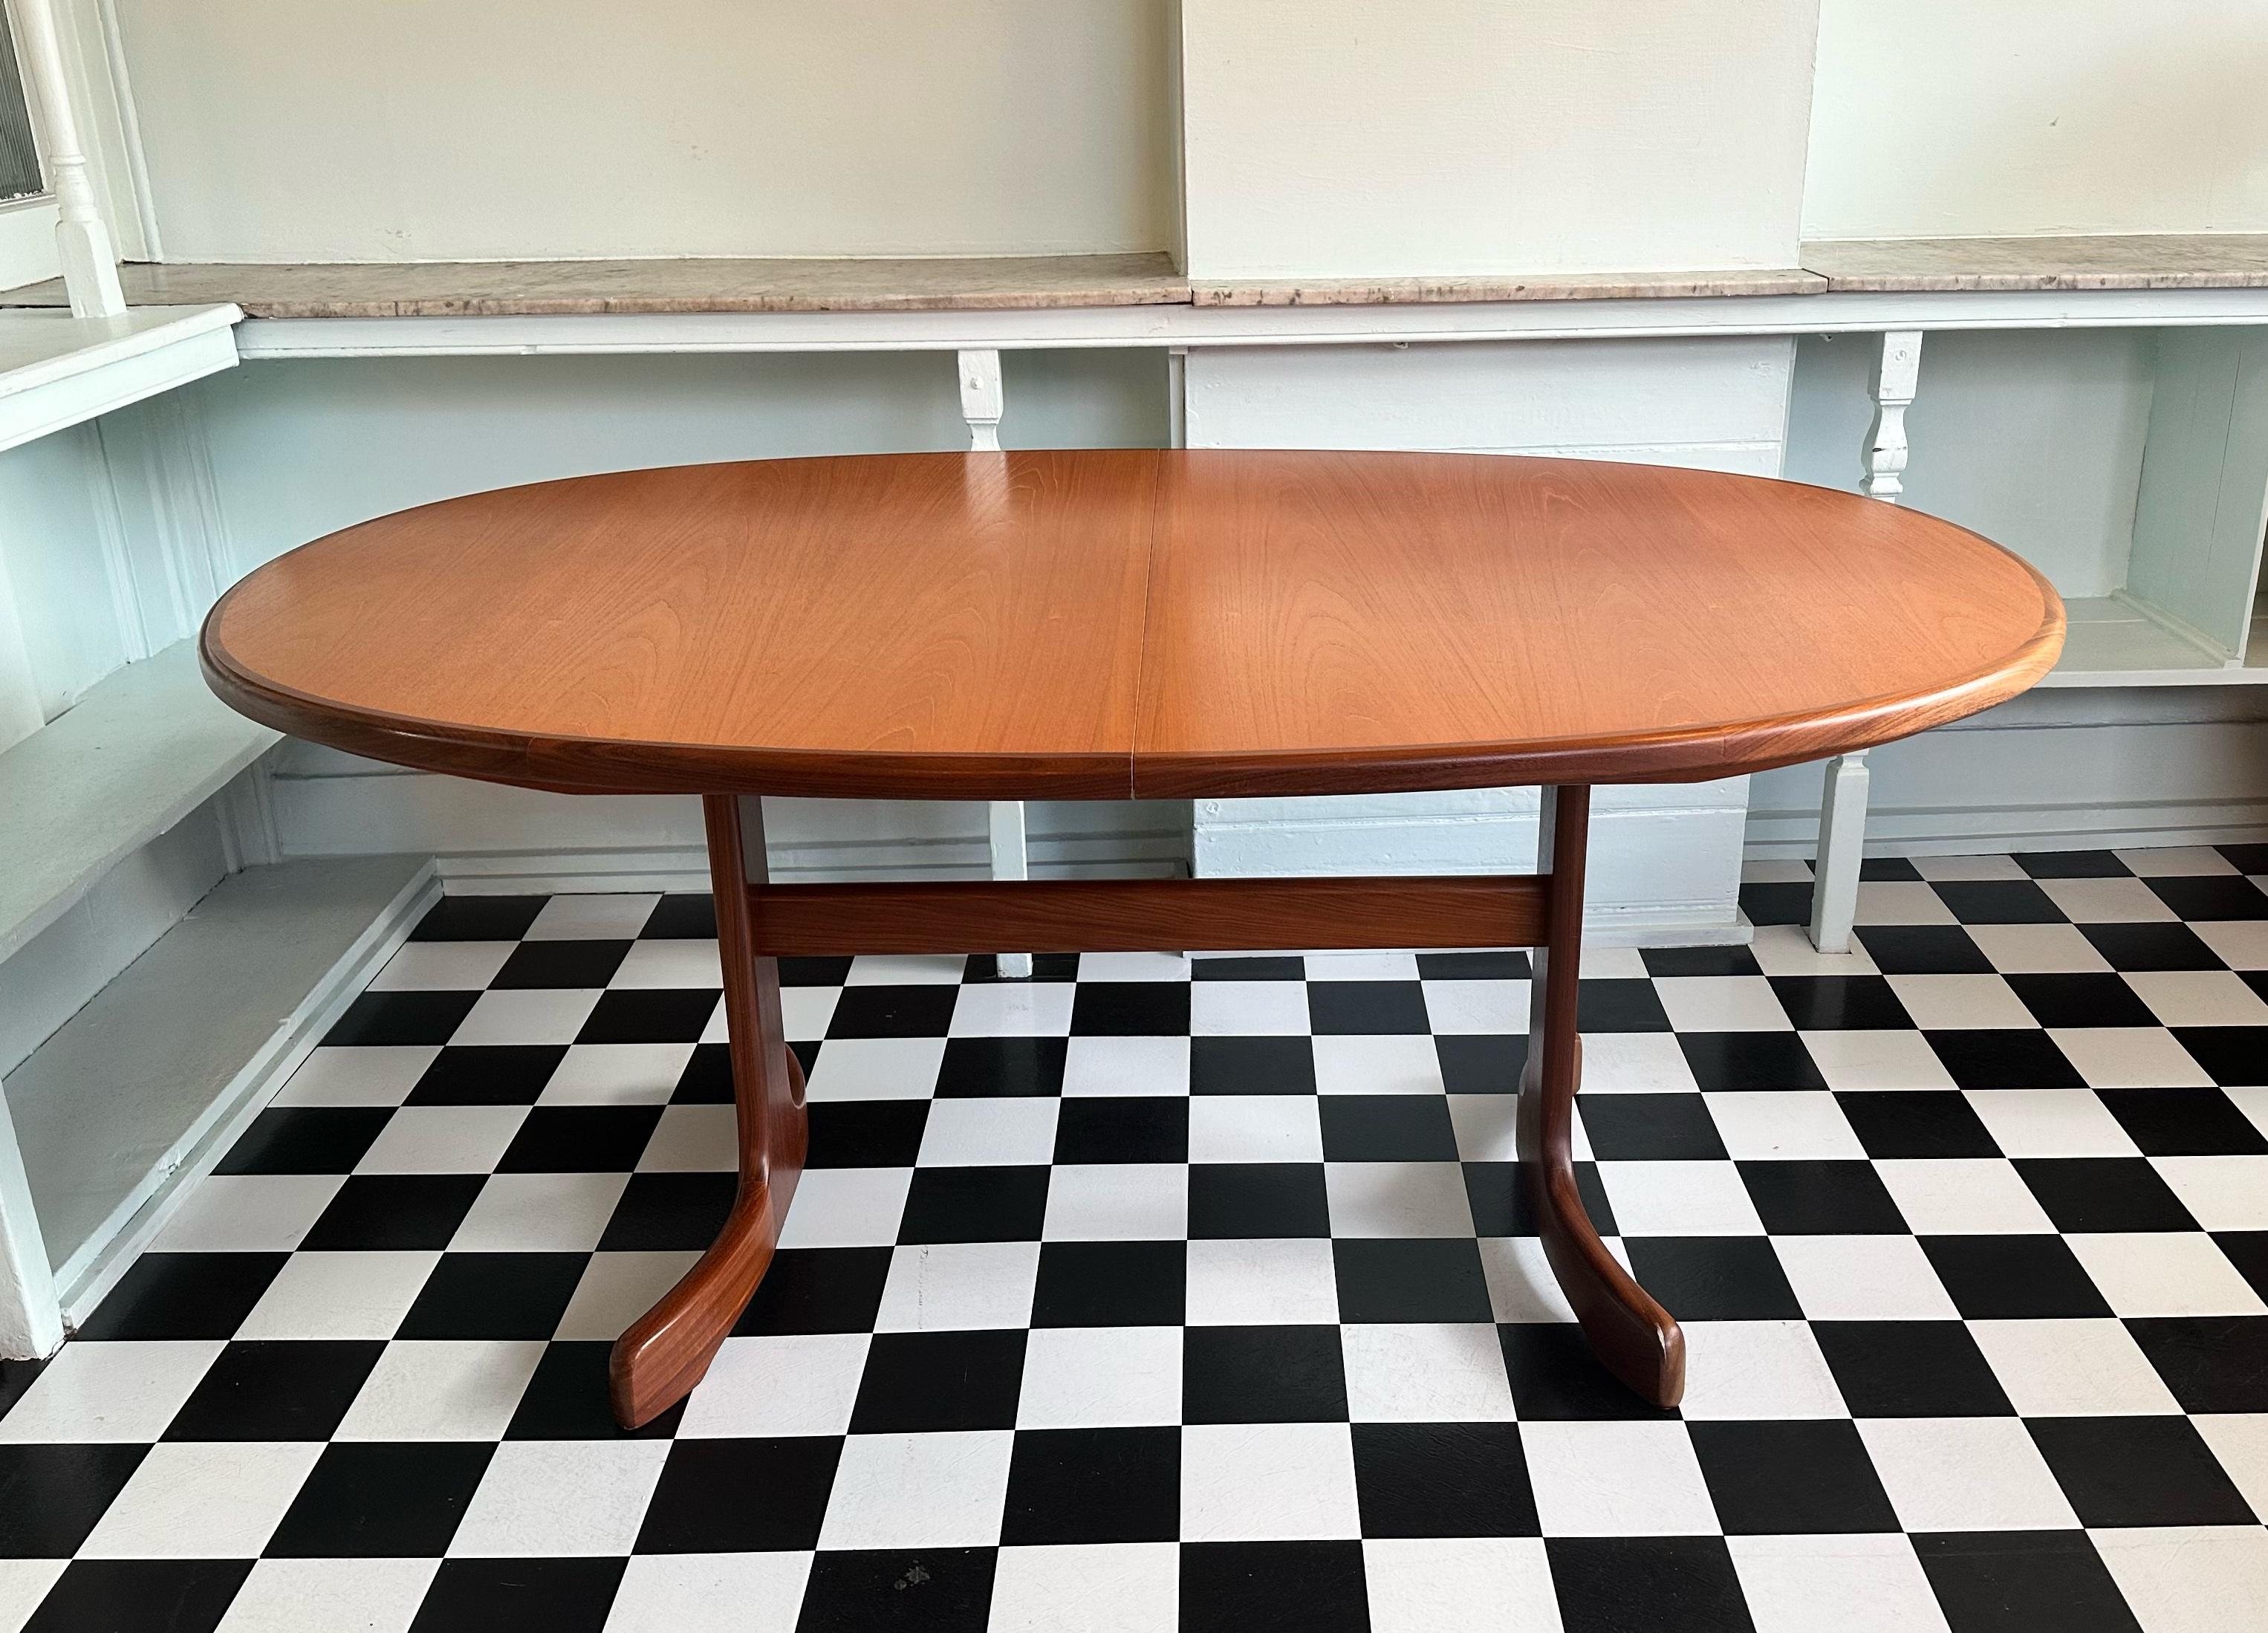 We’re happy to provide our own competitive shipping quotes with trusted couriers. Please message us with your postcode for a more accurate price. Thank you.

Beautiful mid-century G Plan Fresco teak oval dining table. Immaculate, like new condition,